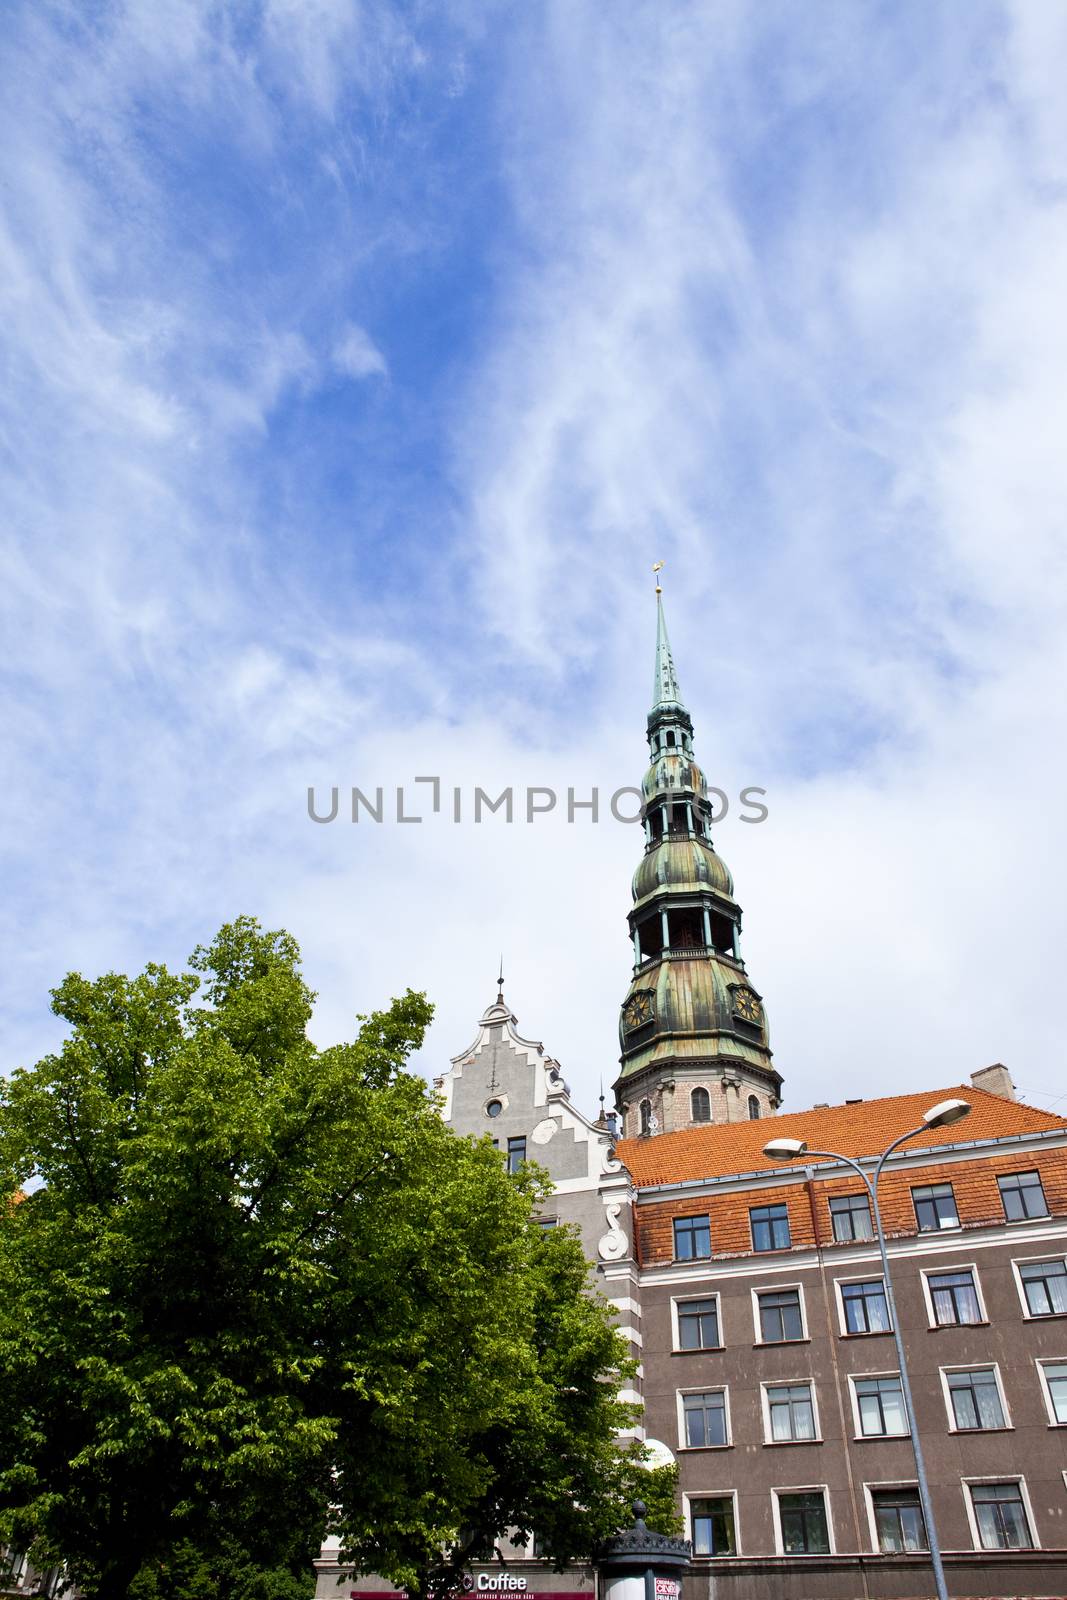 The steeple of the magnificent St. Peter's Church towering over the Old Town in Riga, Latvia.